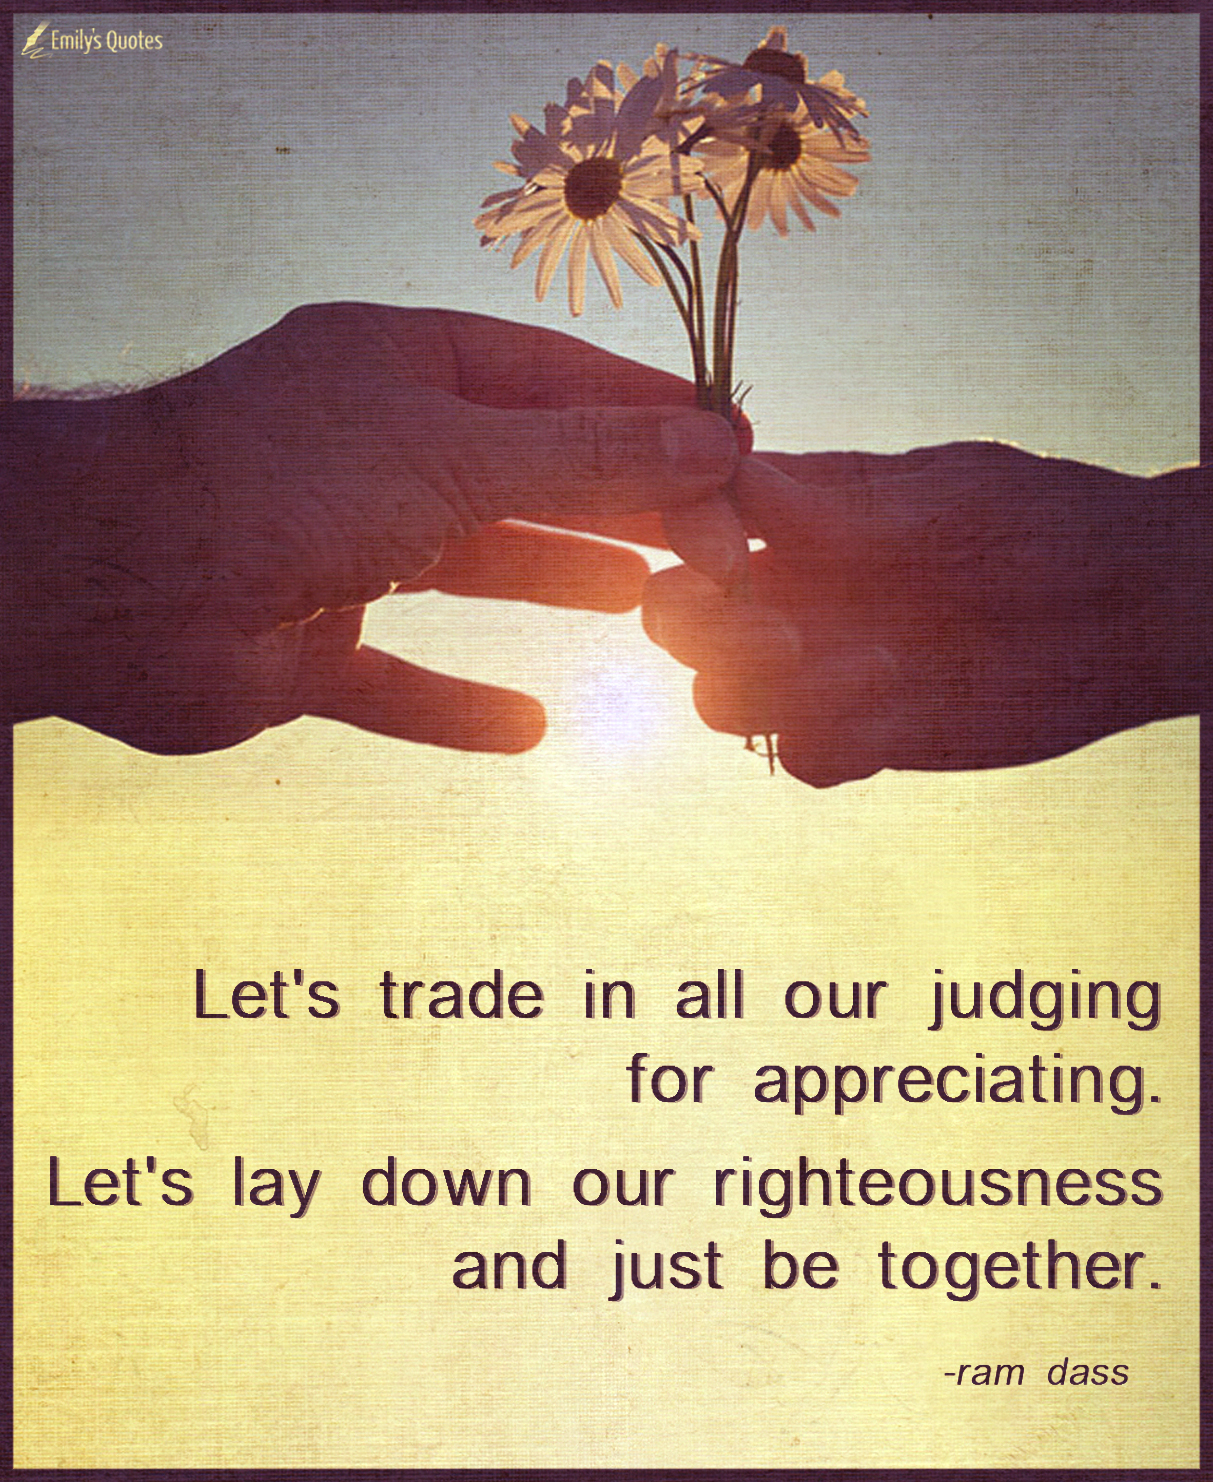 Let’s trade in all our judging for appreciating. Let’s lay down our